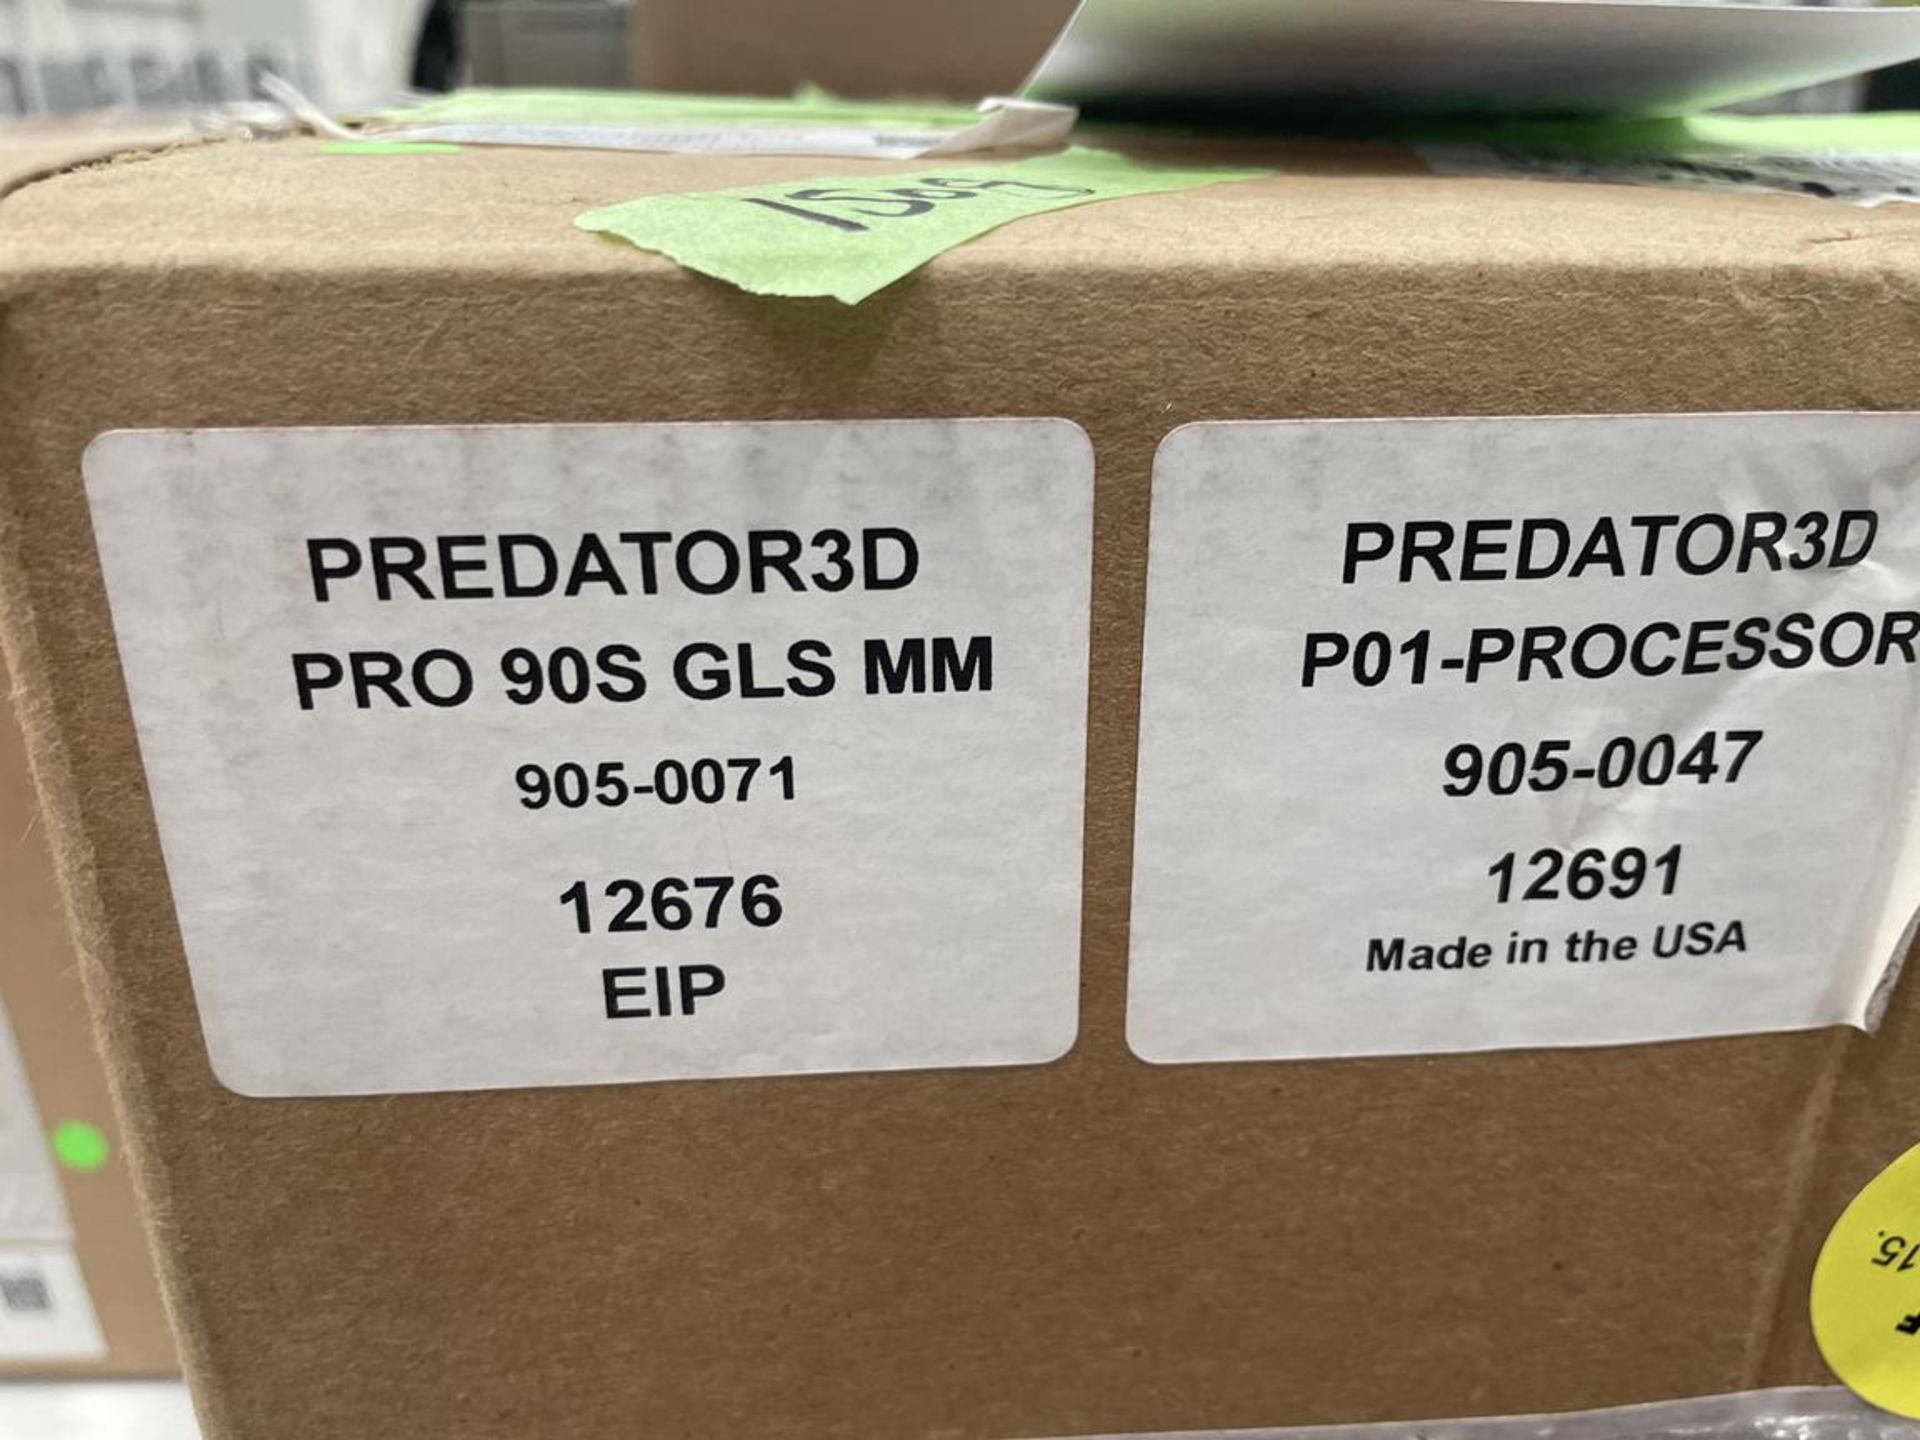 Predator, Pro 90S GLS 3D glass master process scanner with PO1-processor, 905-0047 12691 - Image 2 of 2